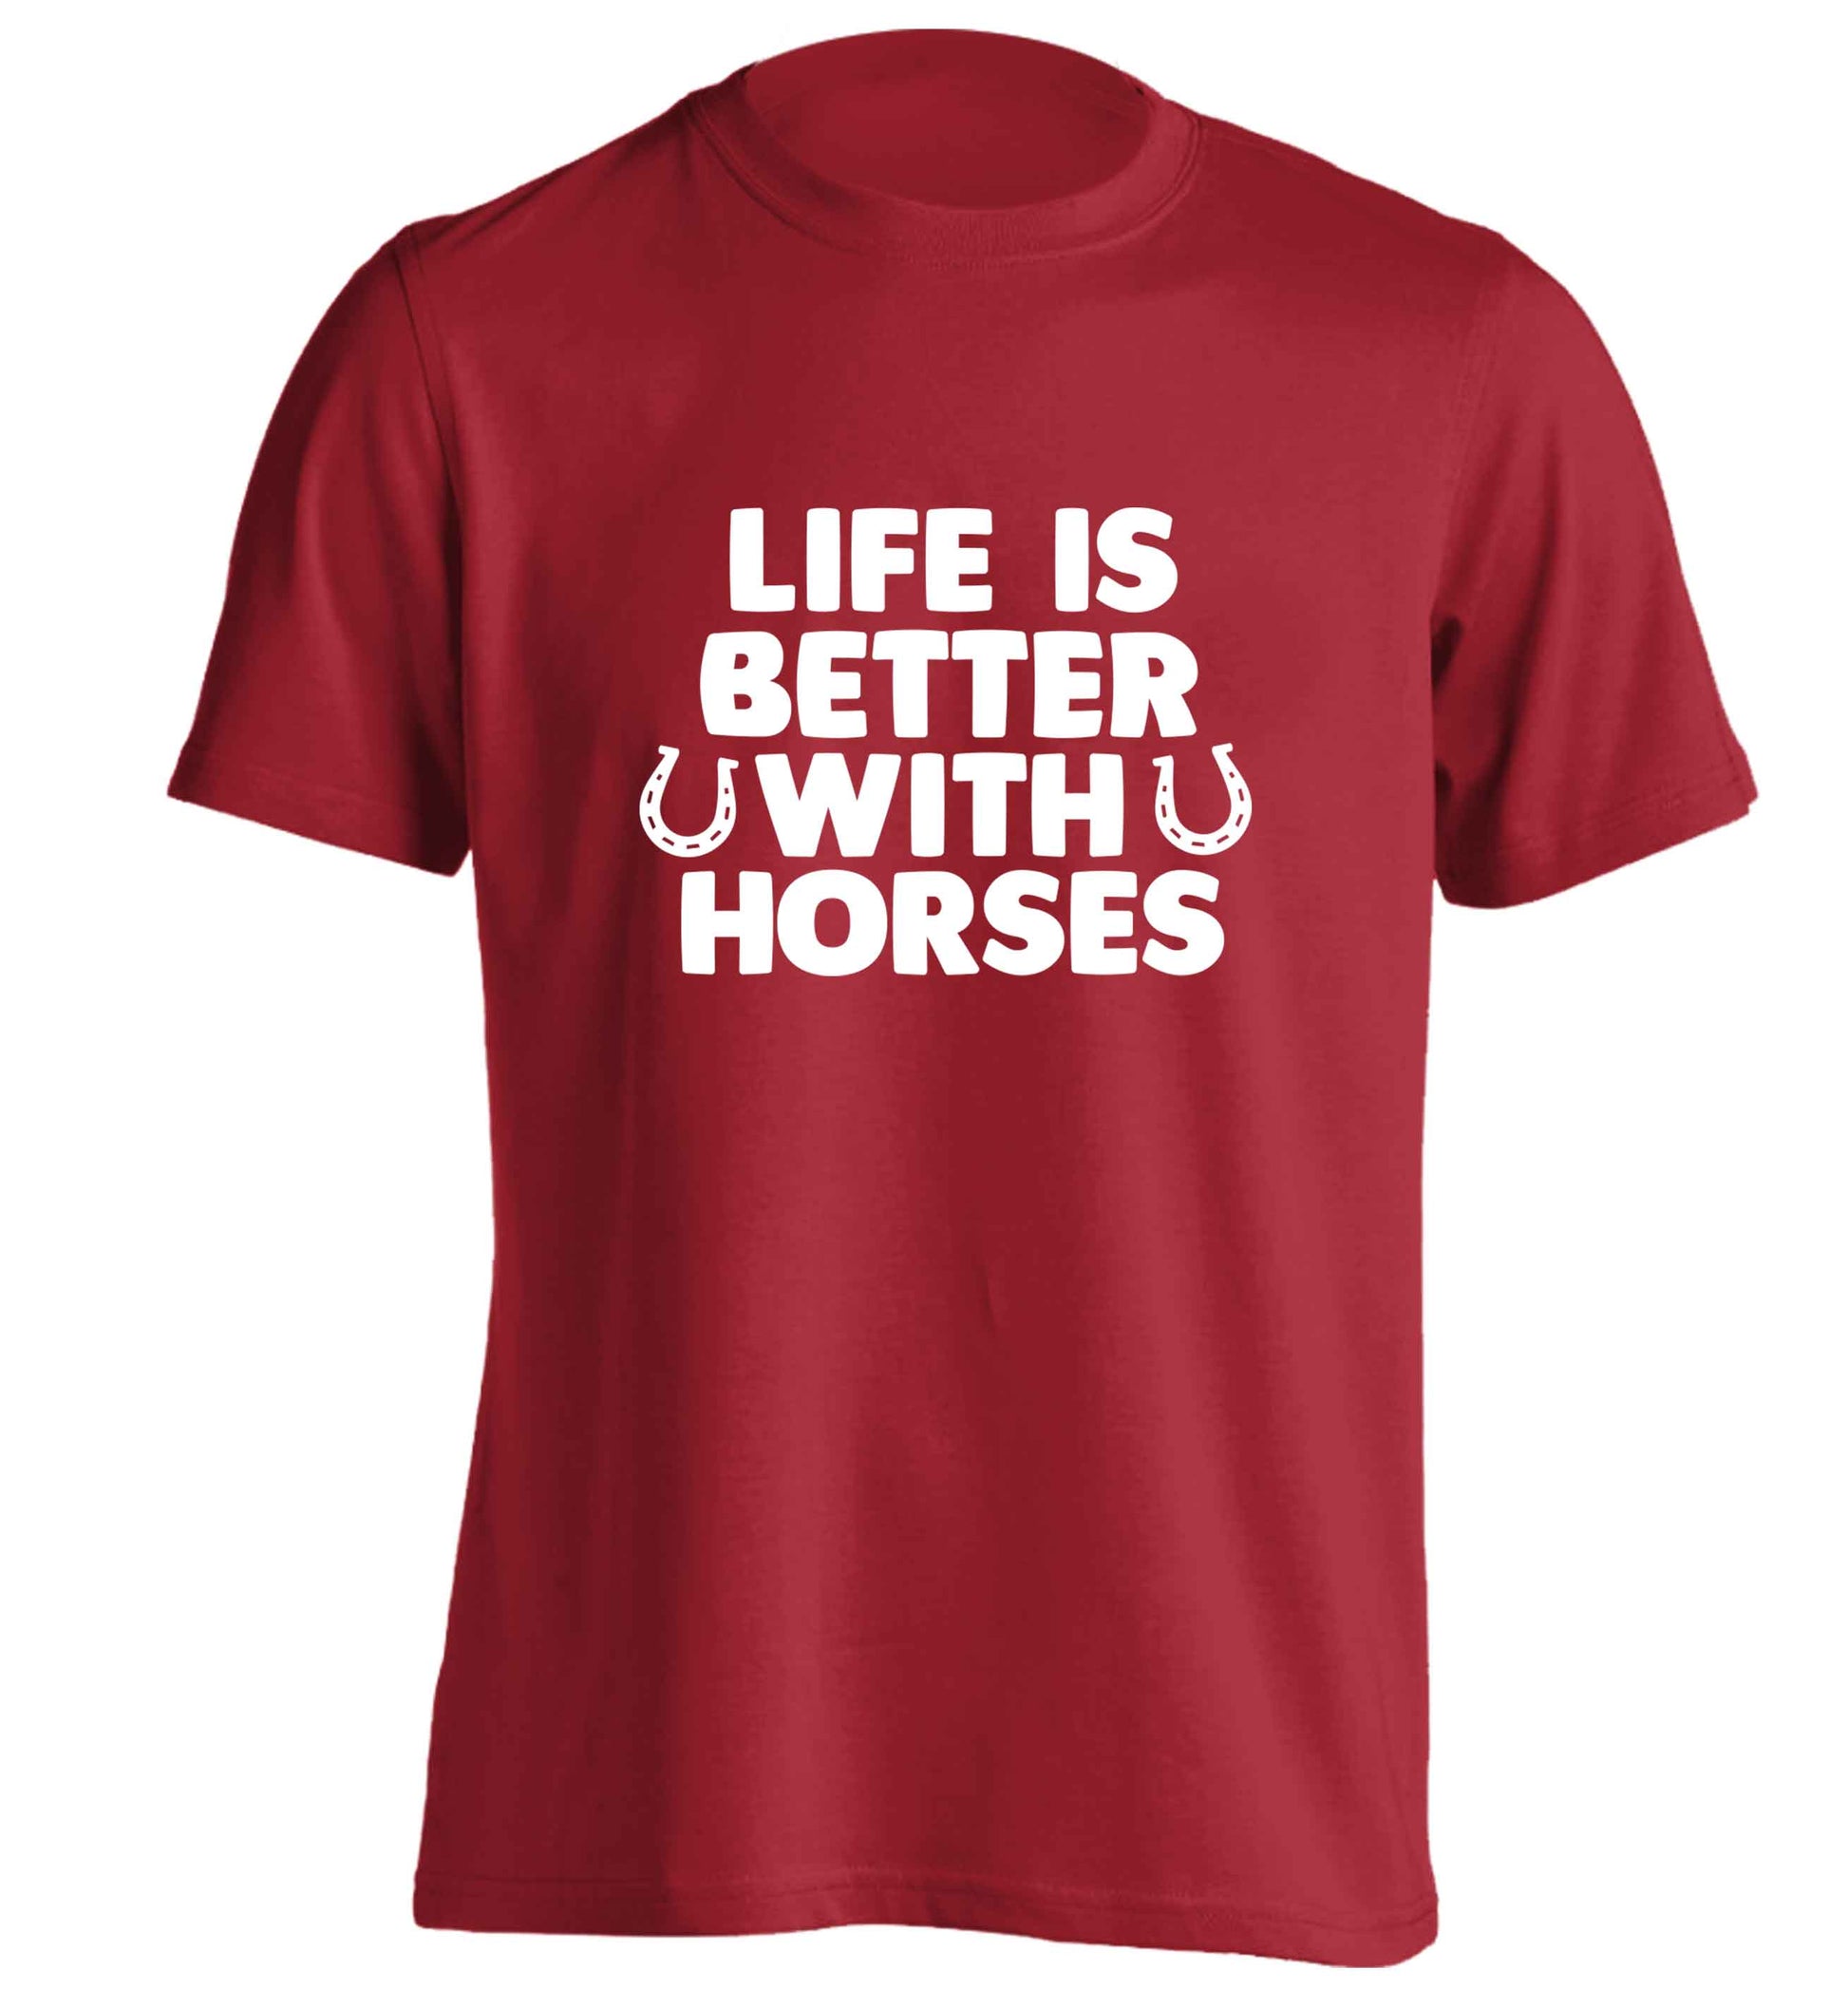 Life is better with horses adults unisex red Tshirt 2XL